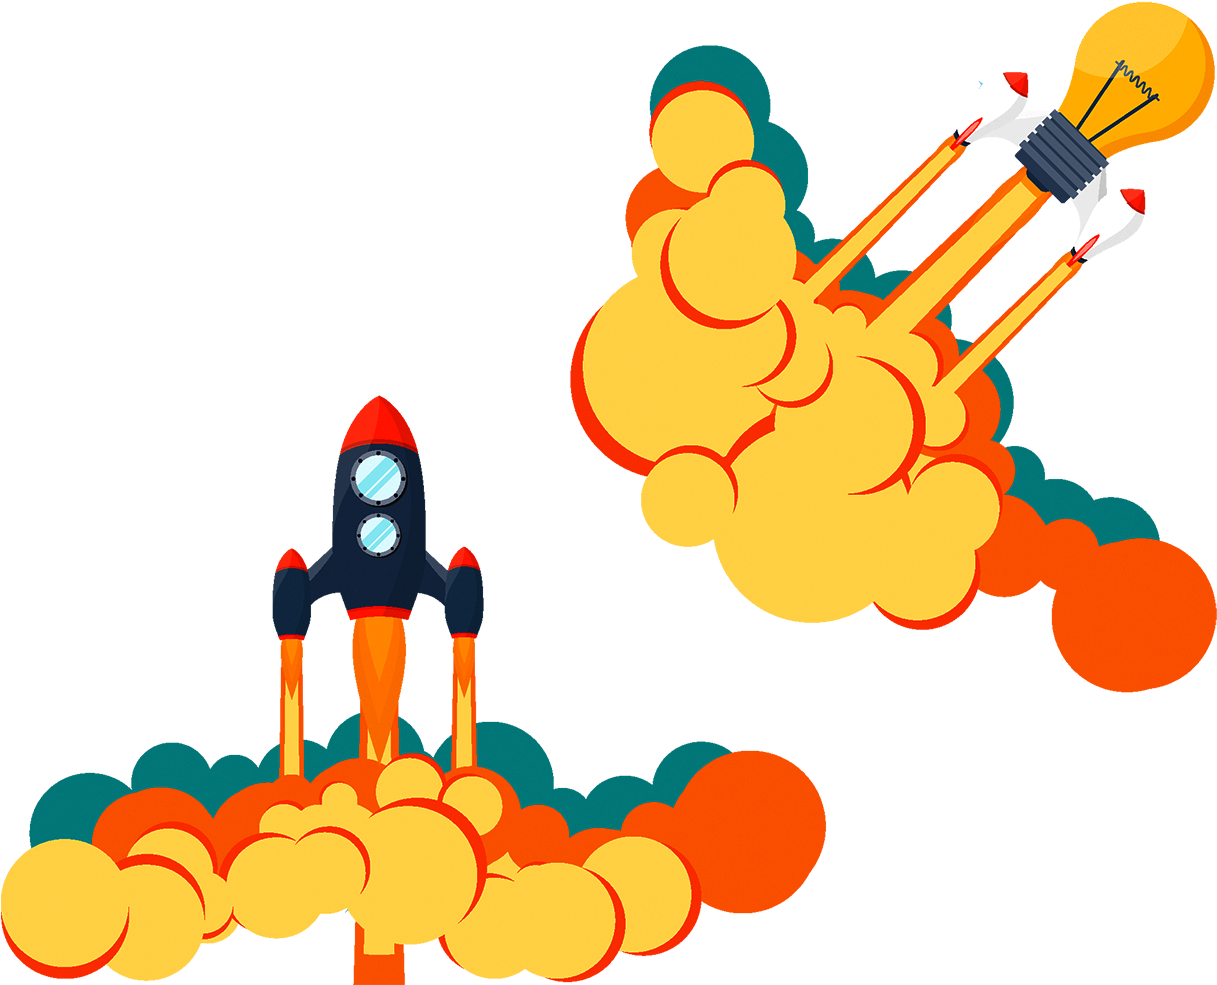 Rocket Launch Airplane Icon - Rocket Launch Airplane Icon (1300x1071)